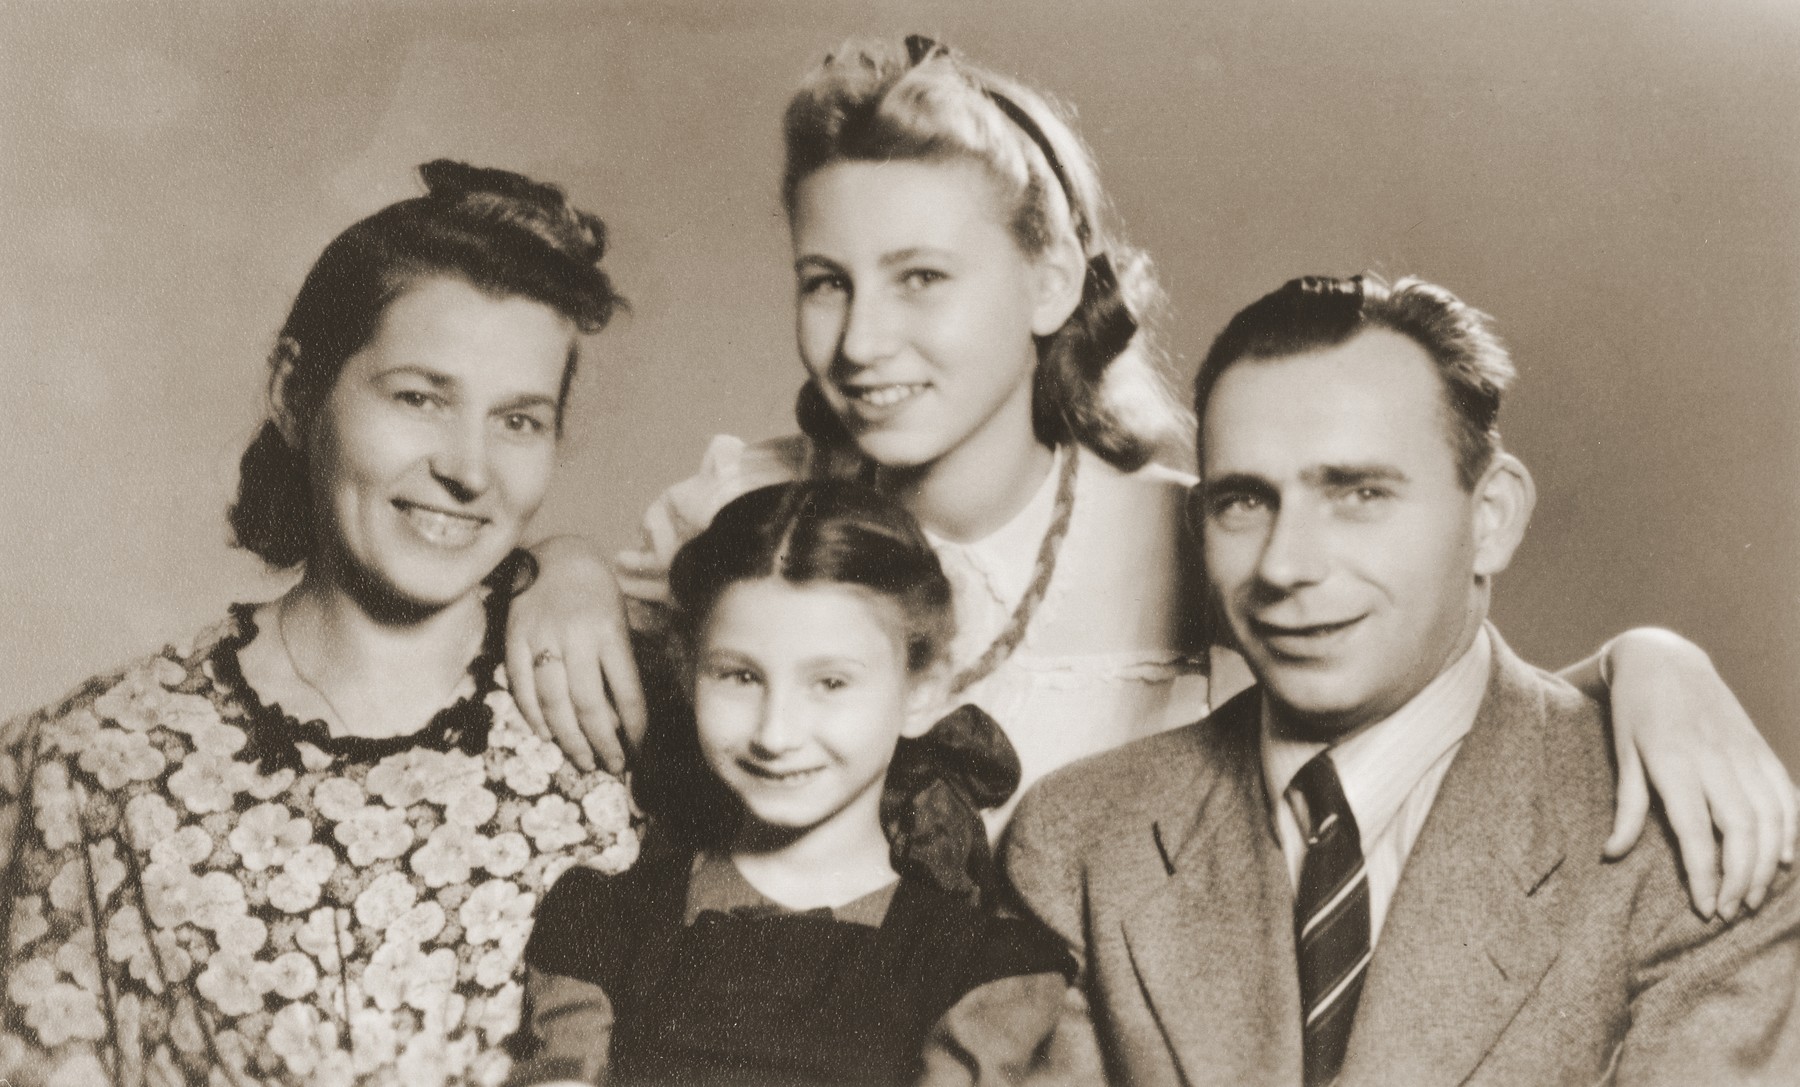 Alicja and Zofja Fajnsztejn, two Jewish sisters in hiding, pose with their rescuers, Helena and Josef Biczyk.  

The picture was taken in the photo studio of the Biczyk's cousin.